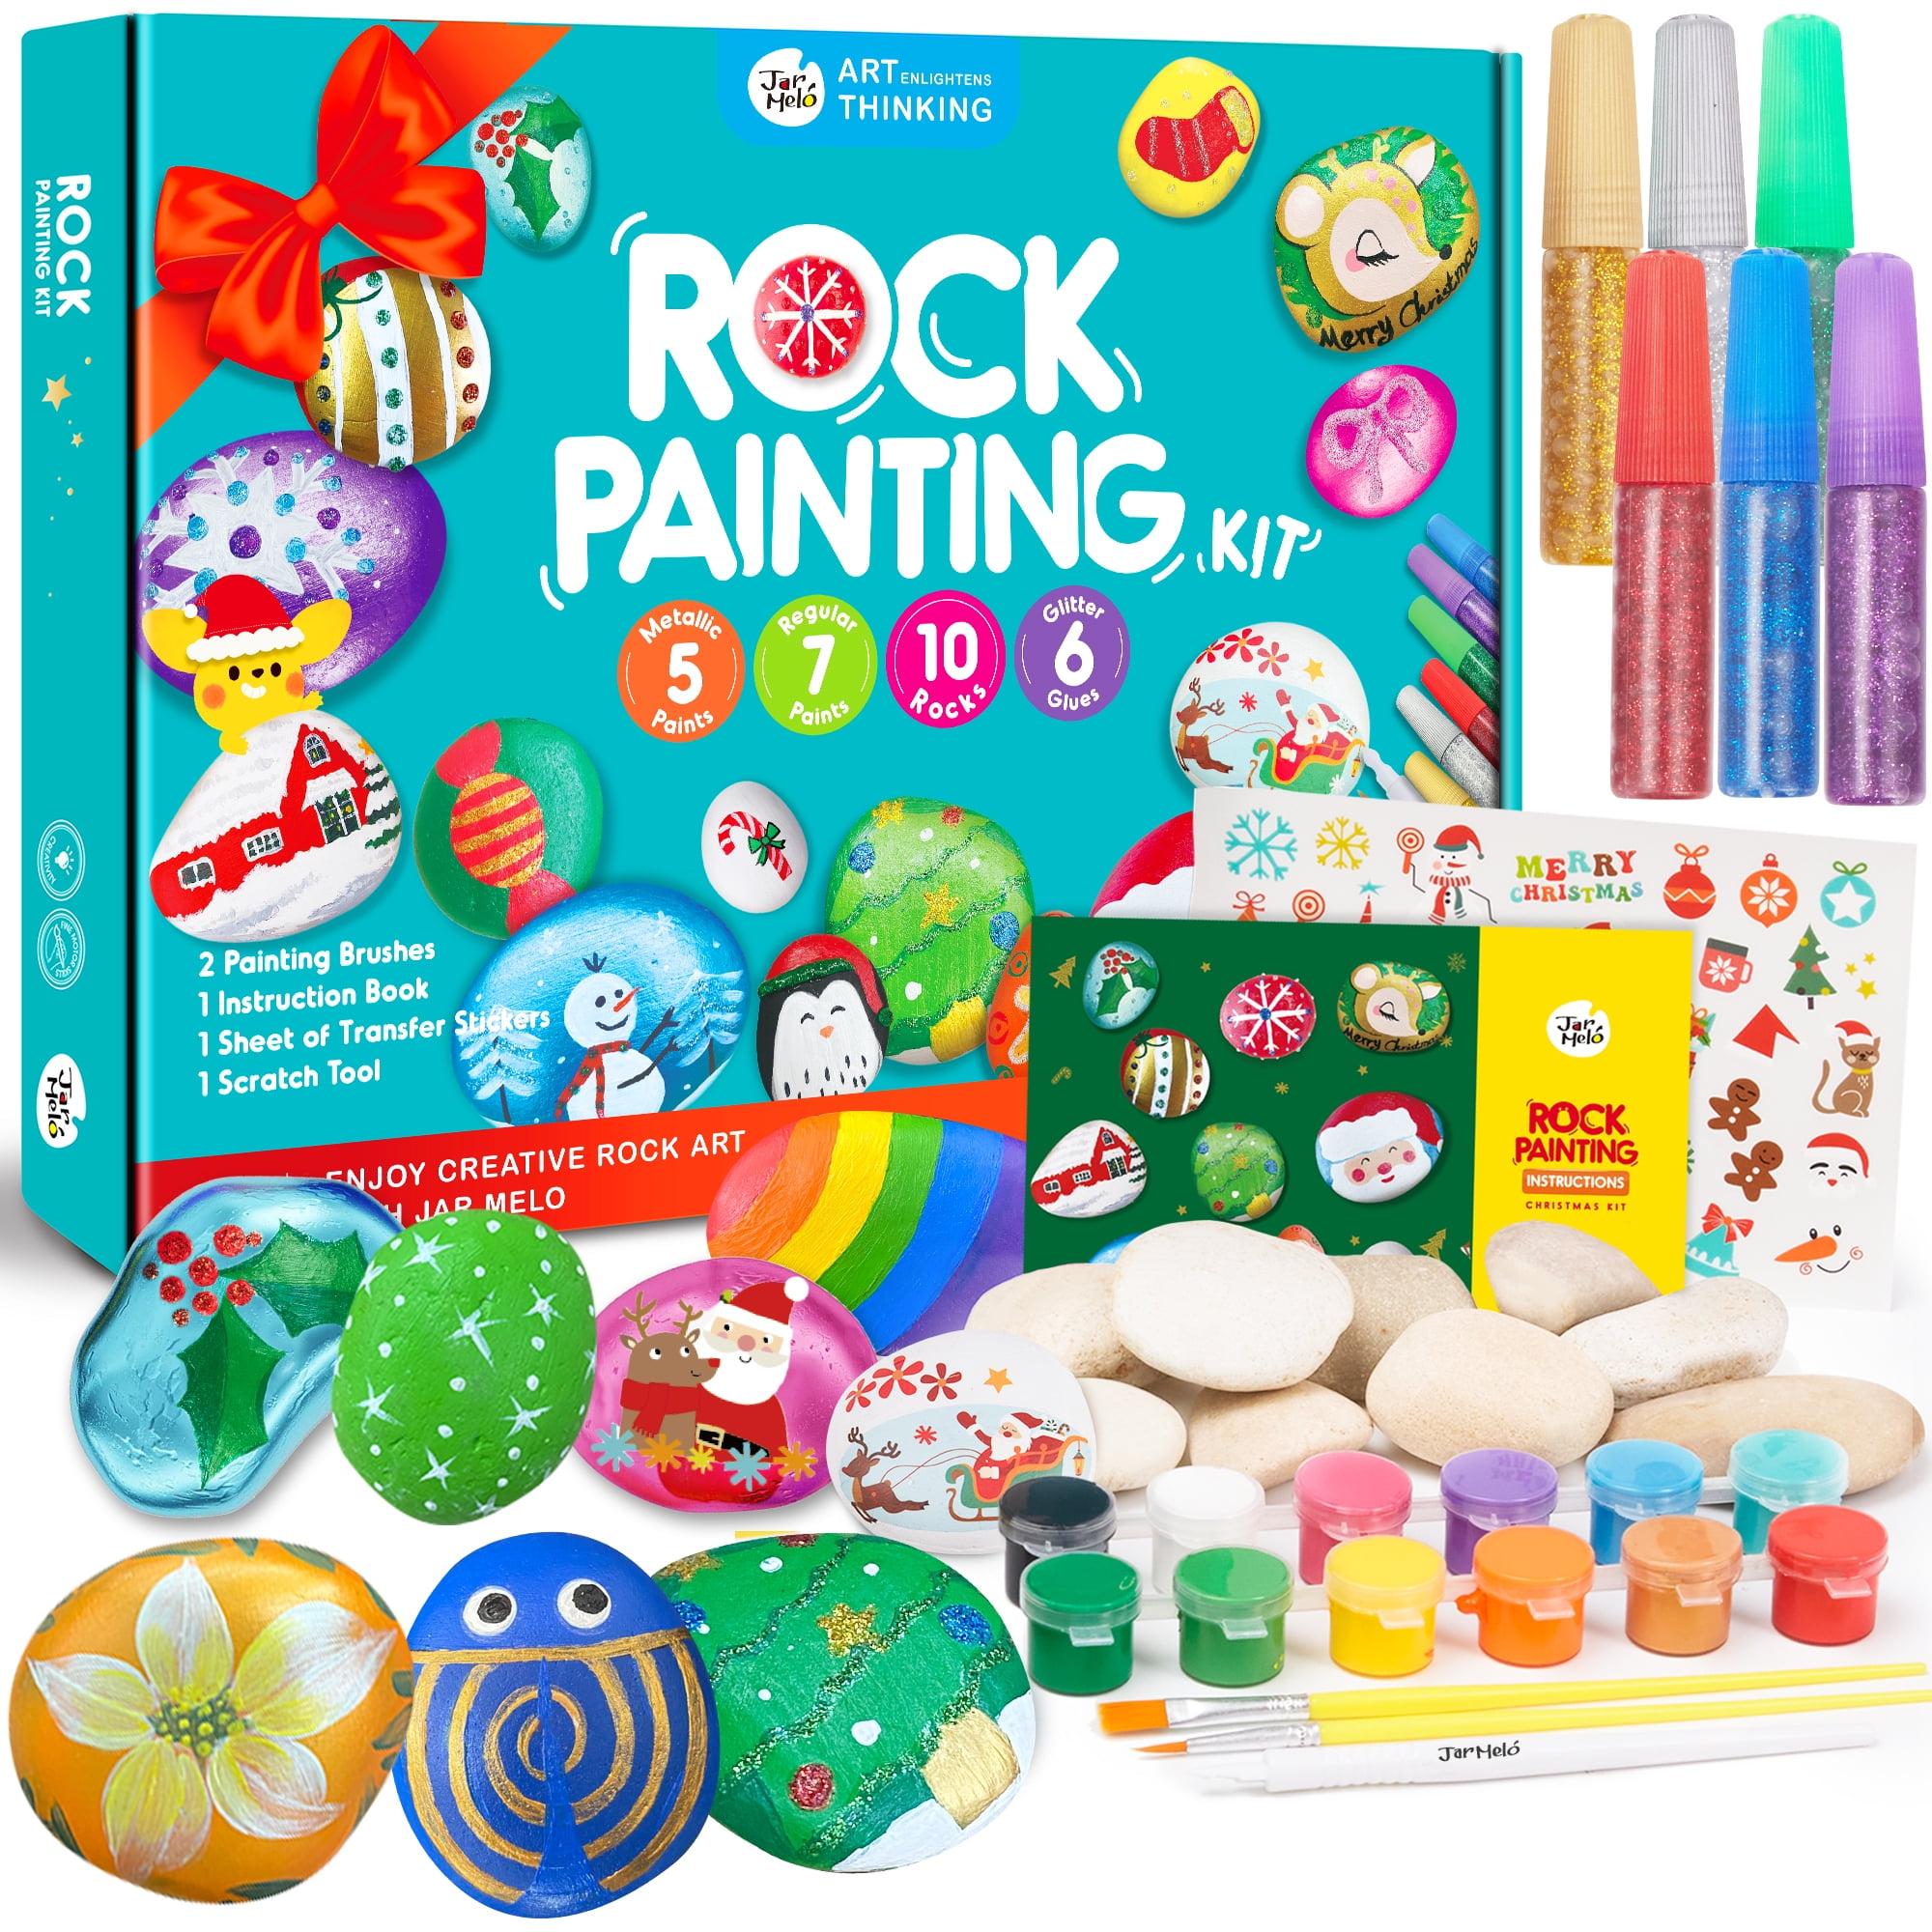 Jar Melo Rock Painting - The Good Play Guide